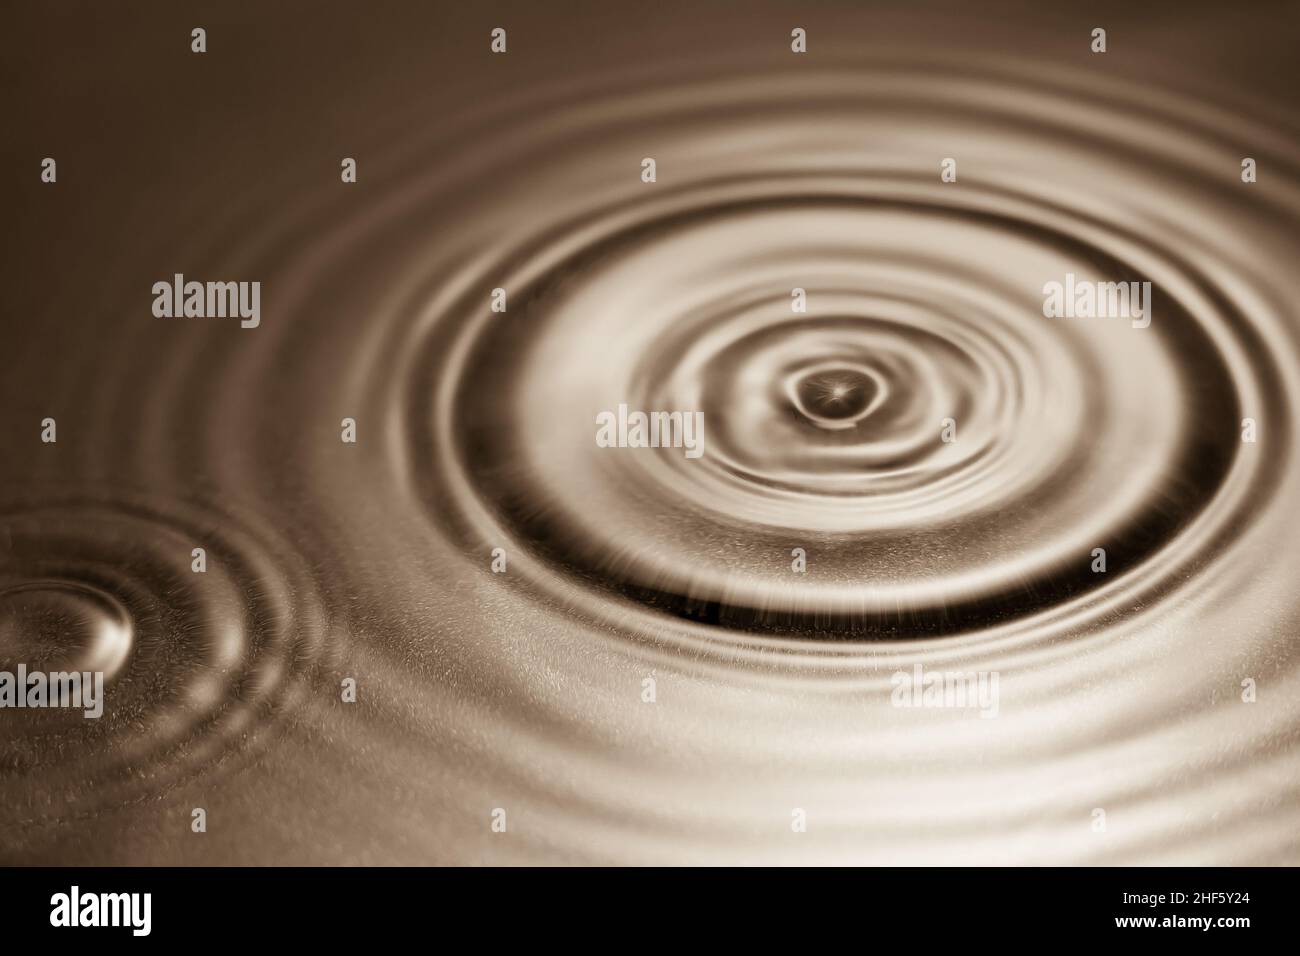 Mocha background with water and rings Stock Photo